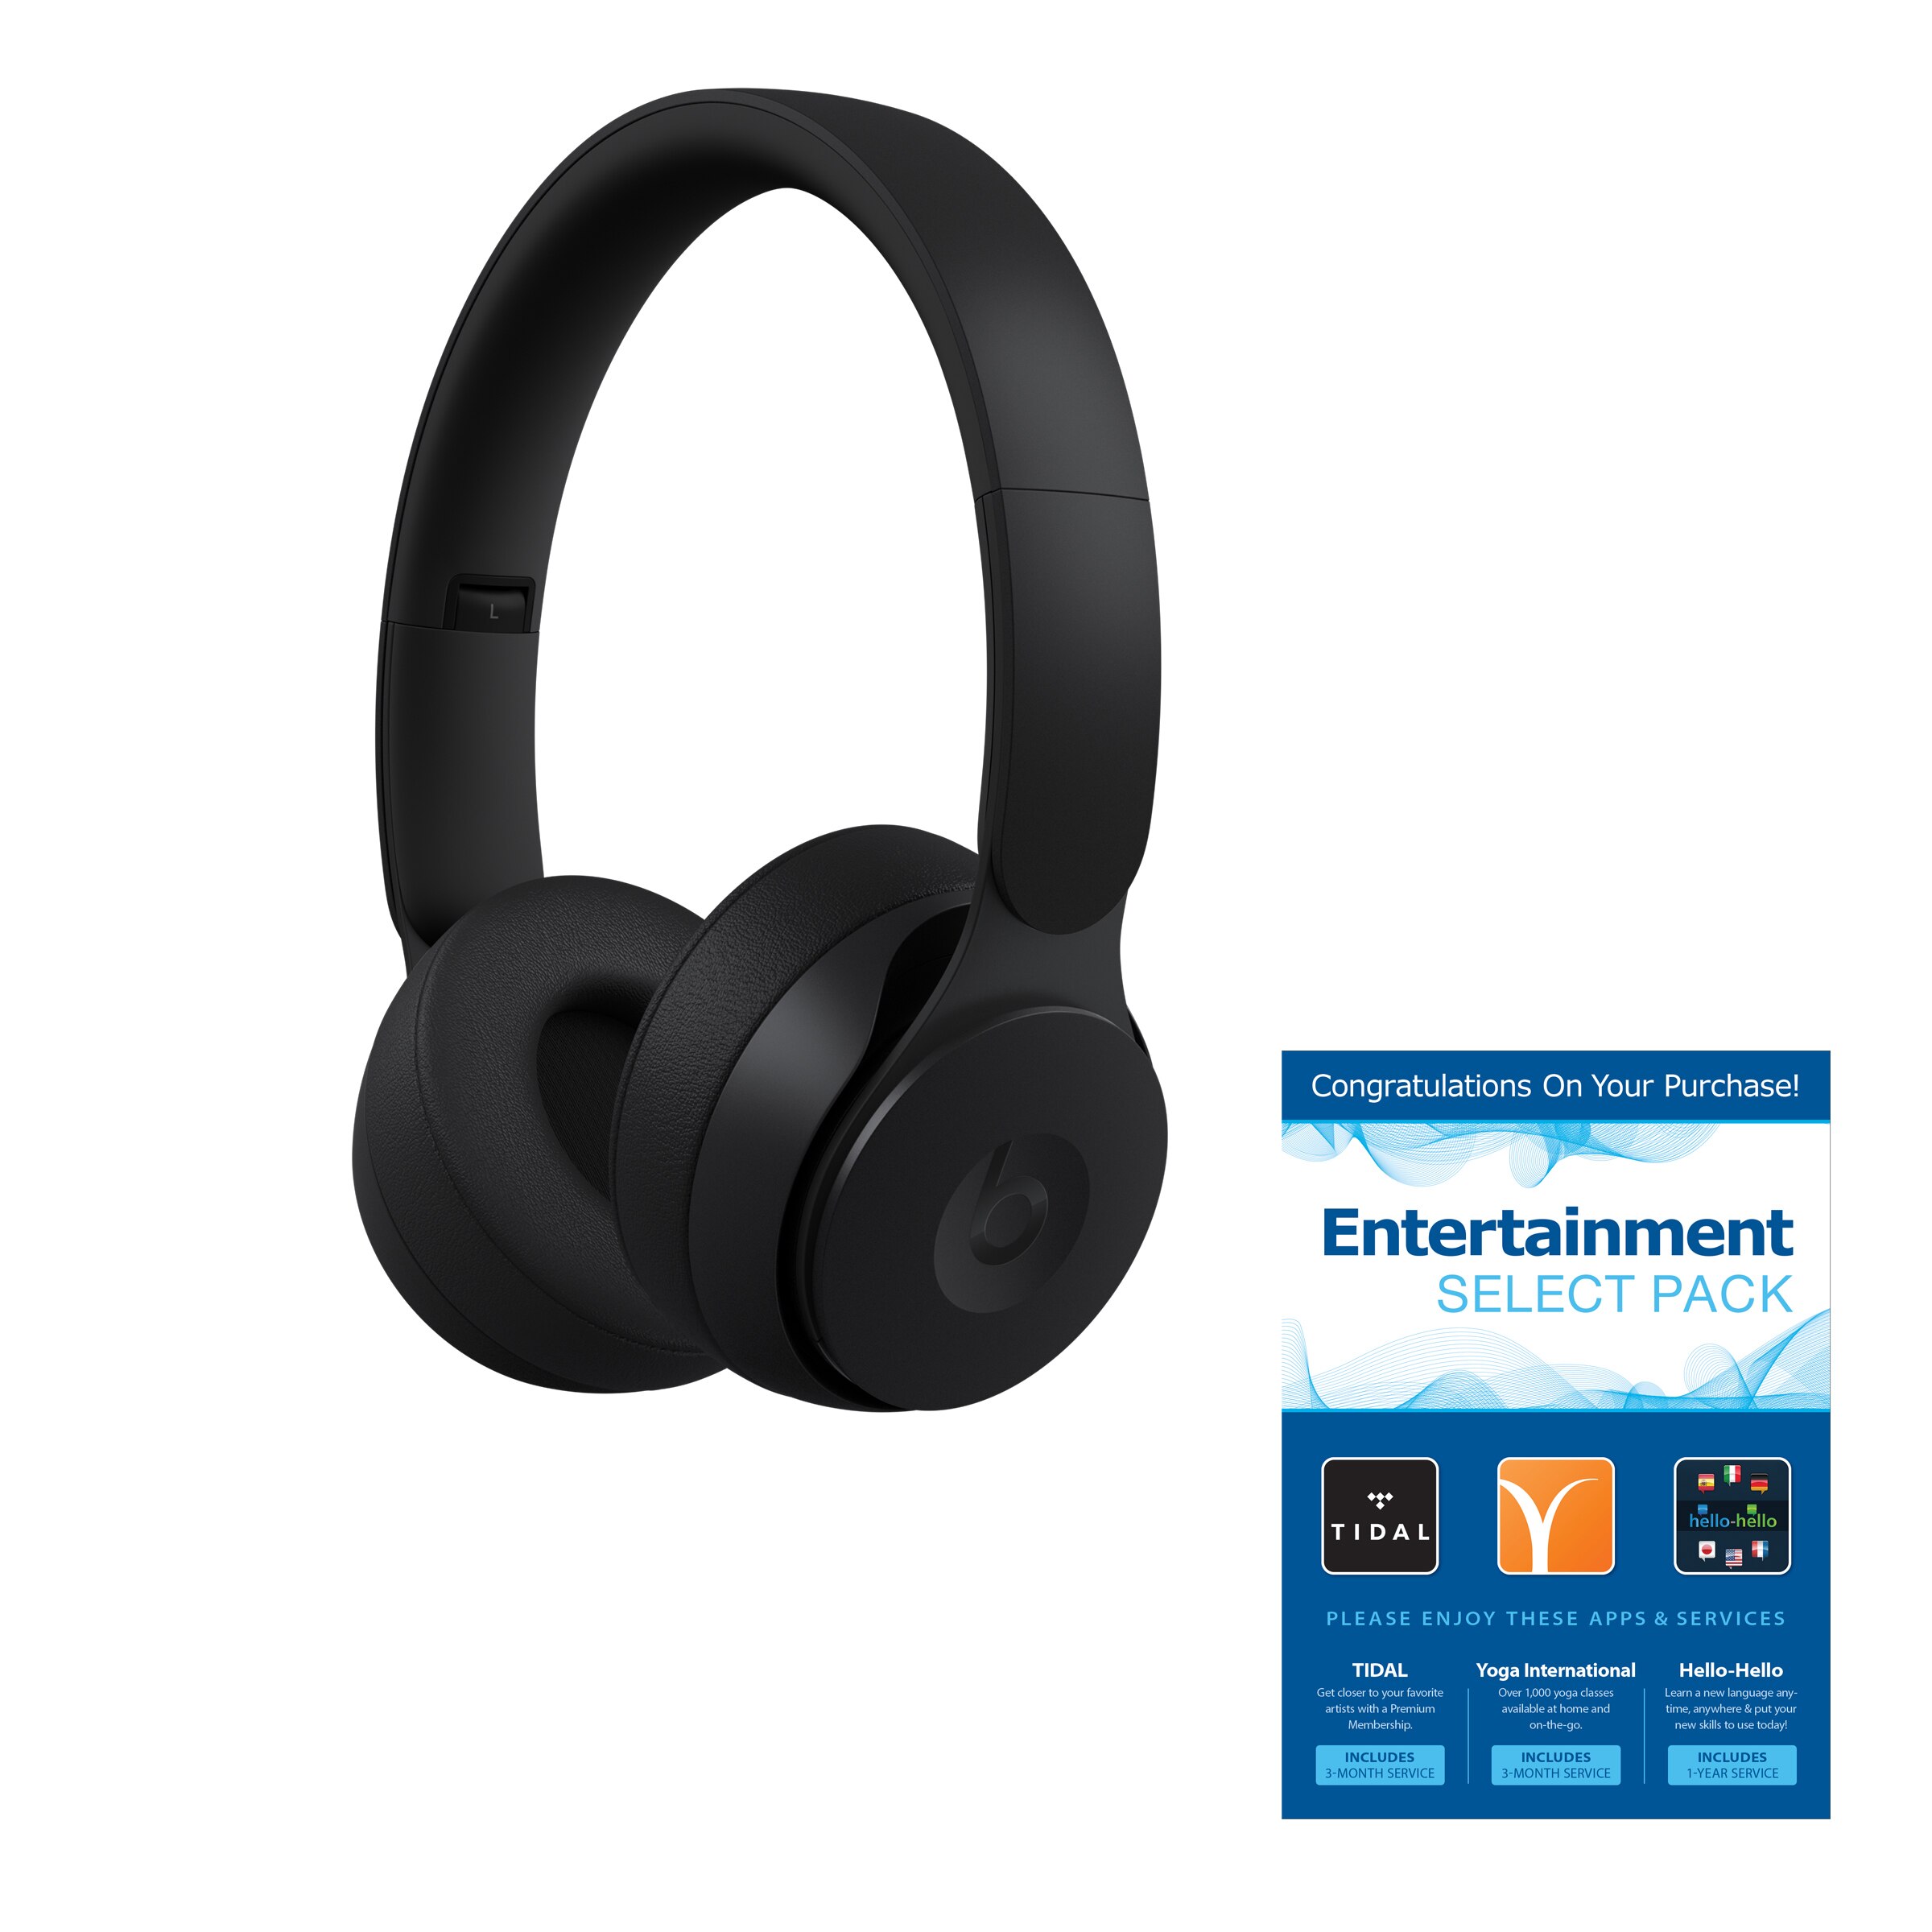 Beats by Dre - Beats Solo Pro Wireless with Entertainment Select Pack